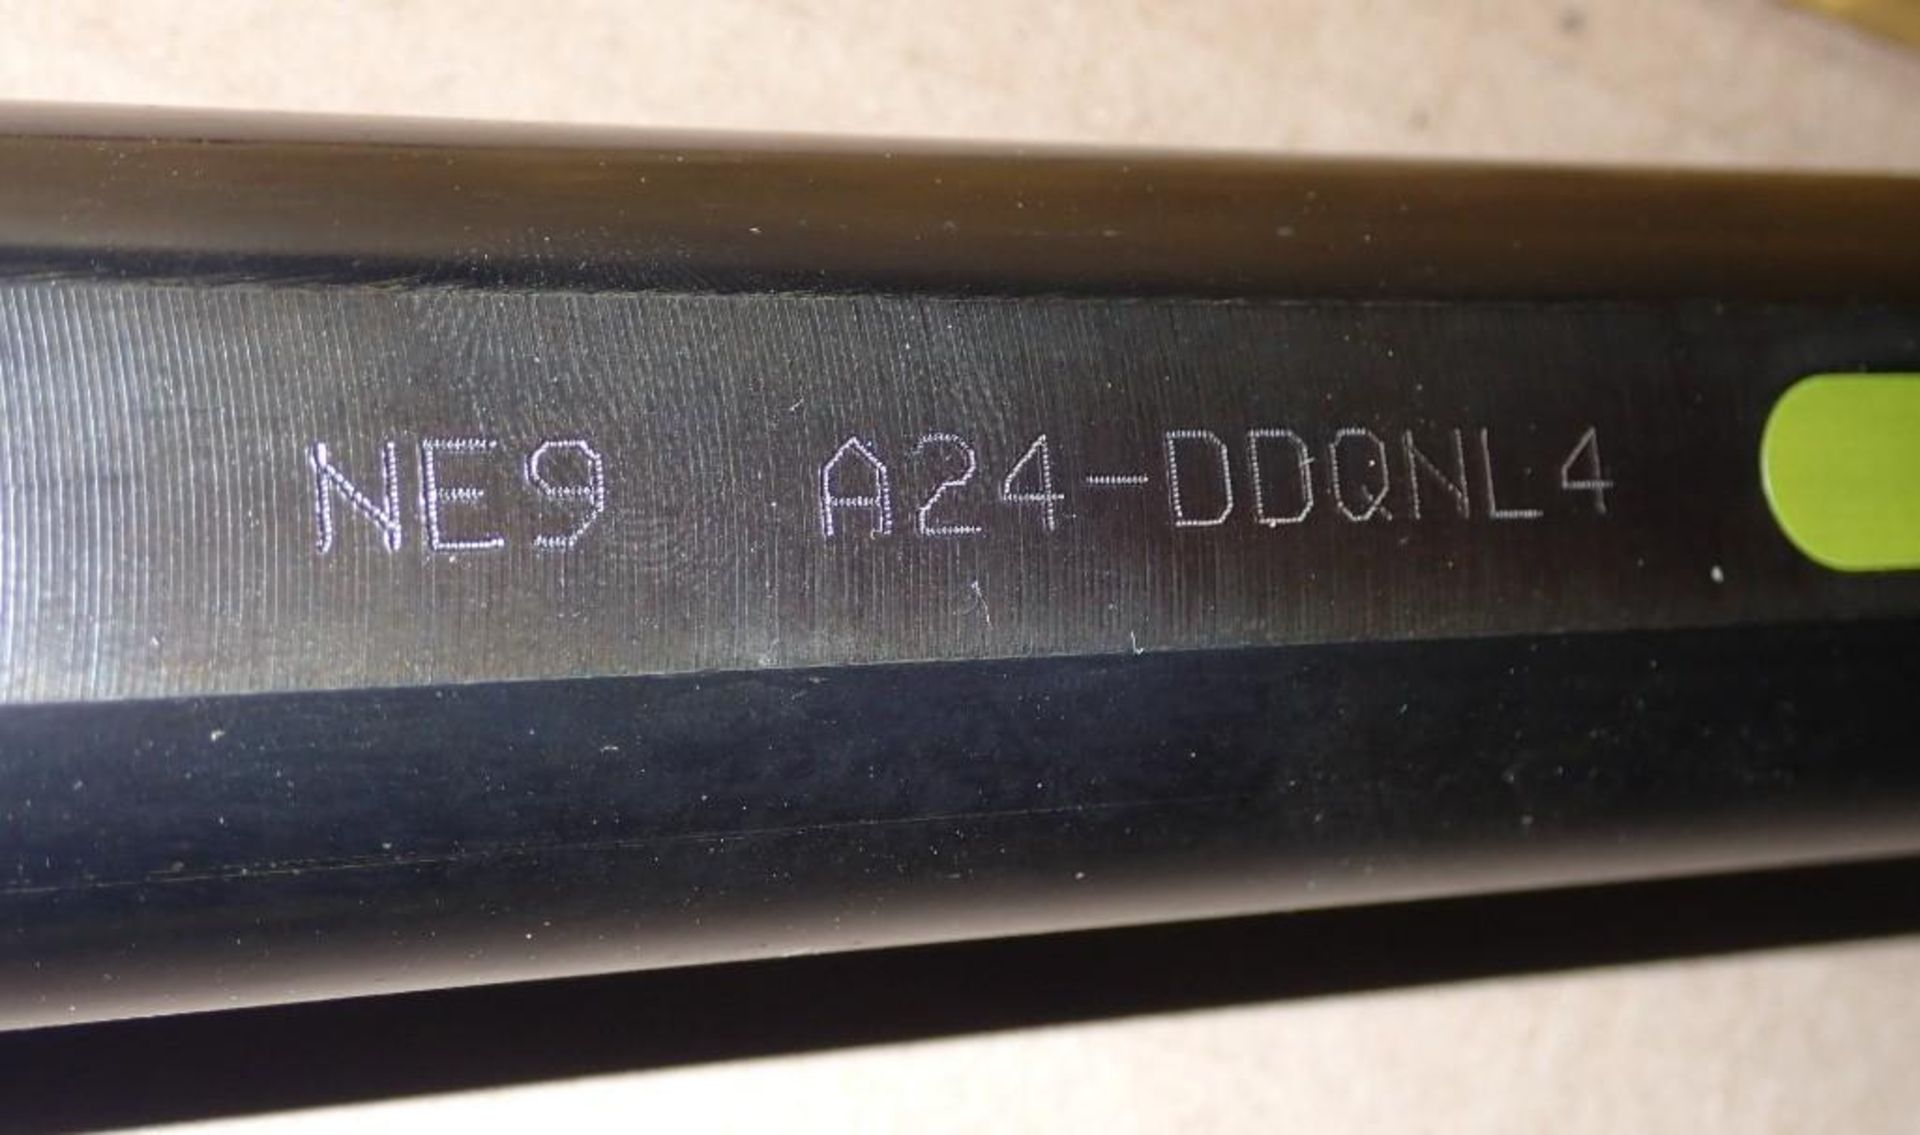 Kennametal #A24-DDQNL4 Boring Bar - Image 3 of 4